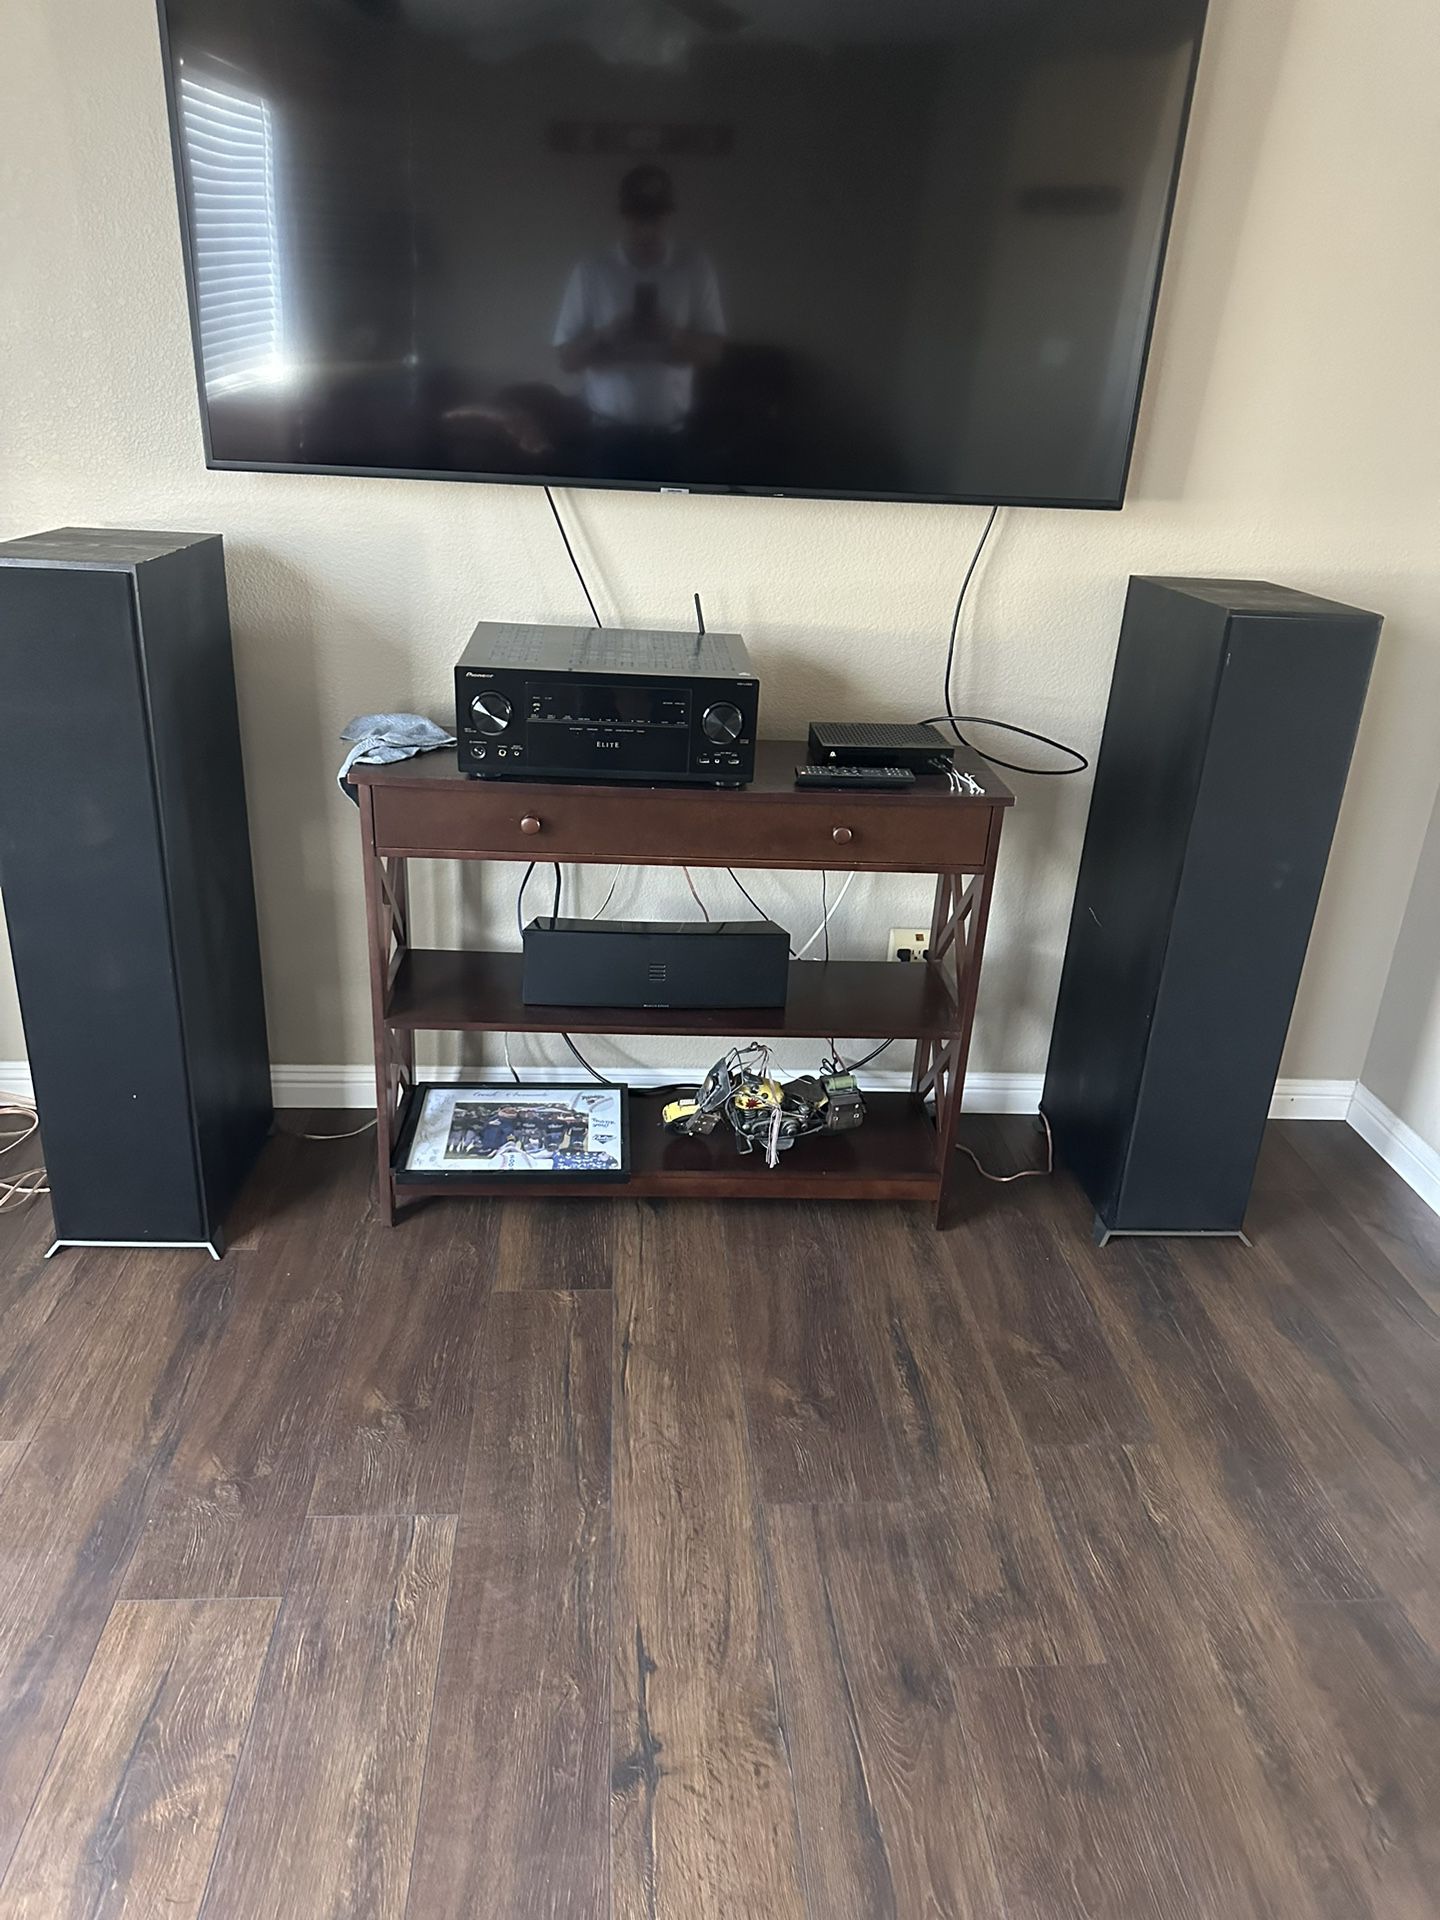 Home Theater System For Sale